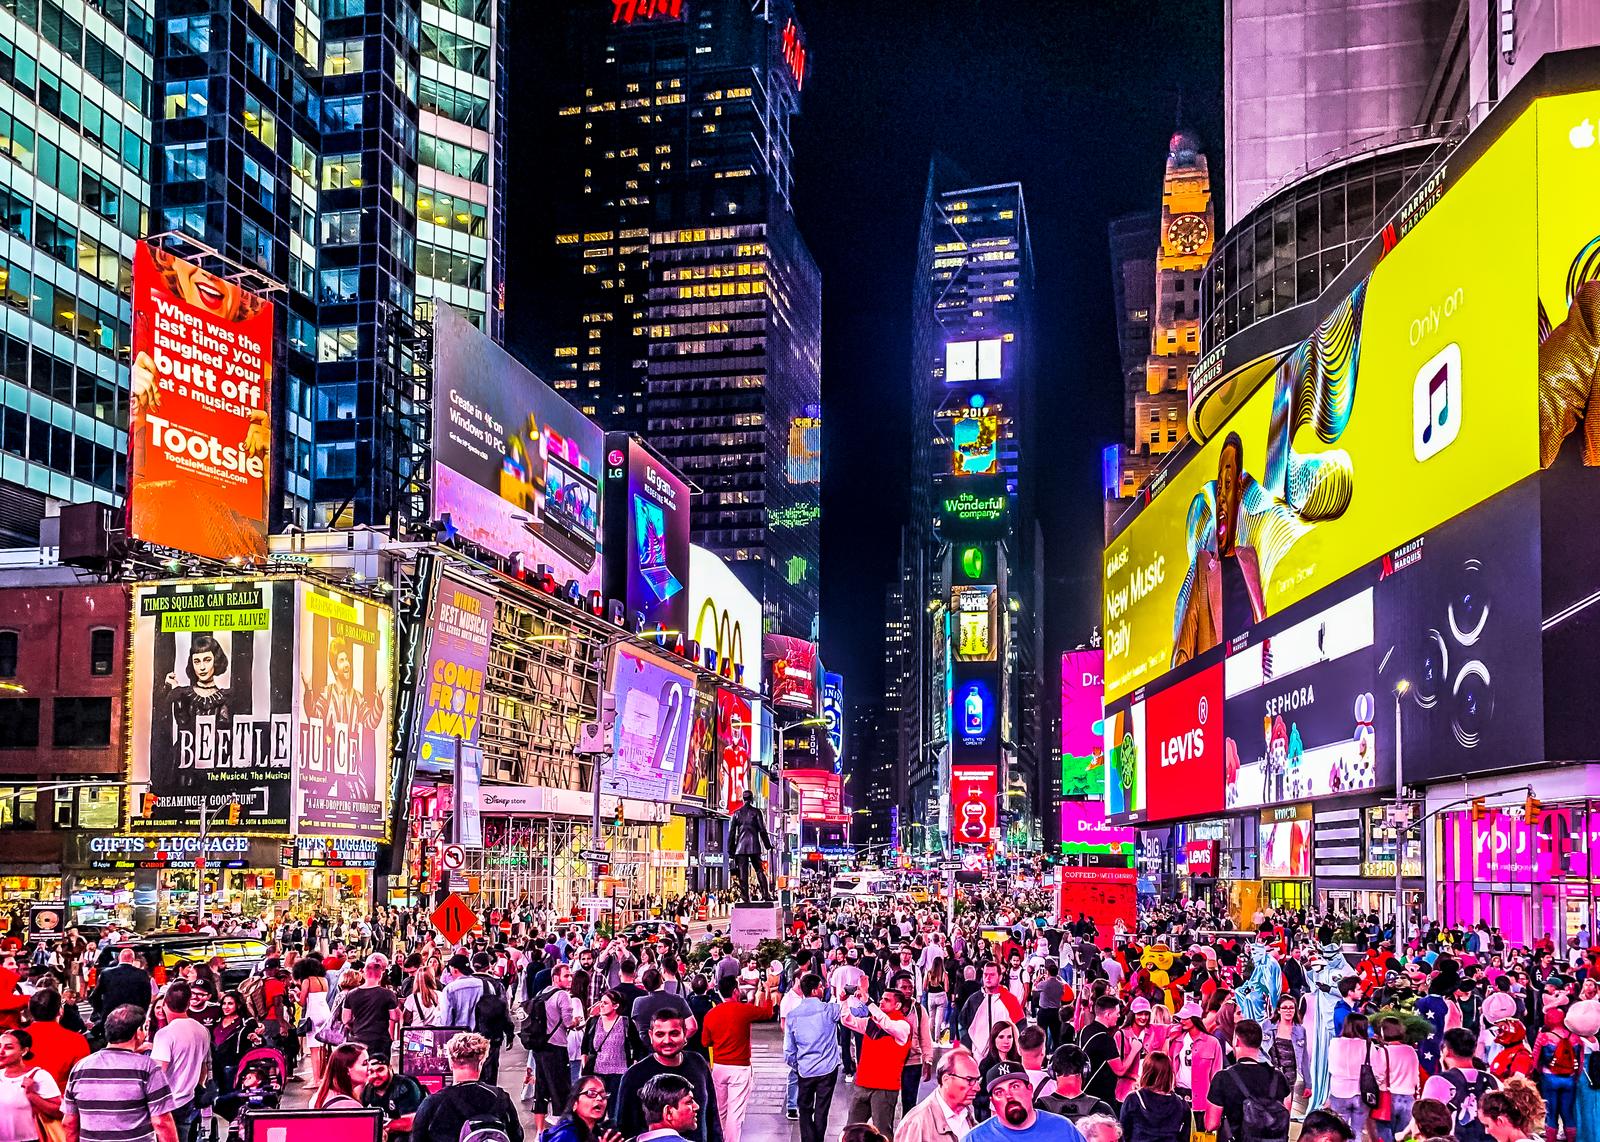 Name That City! Put Your Travel Knowledge to Test With This Picture Quiz! Times Square, New York